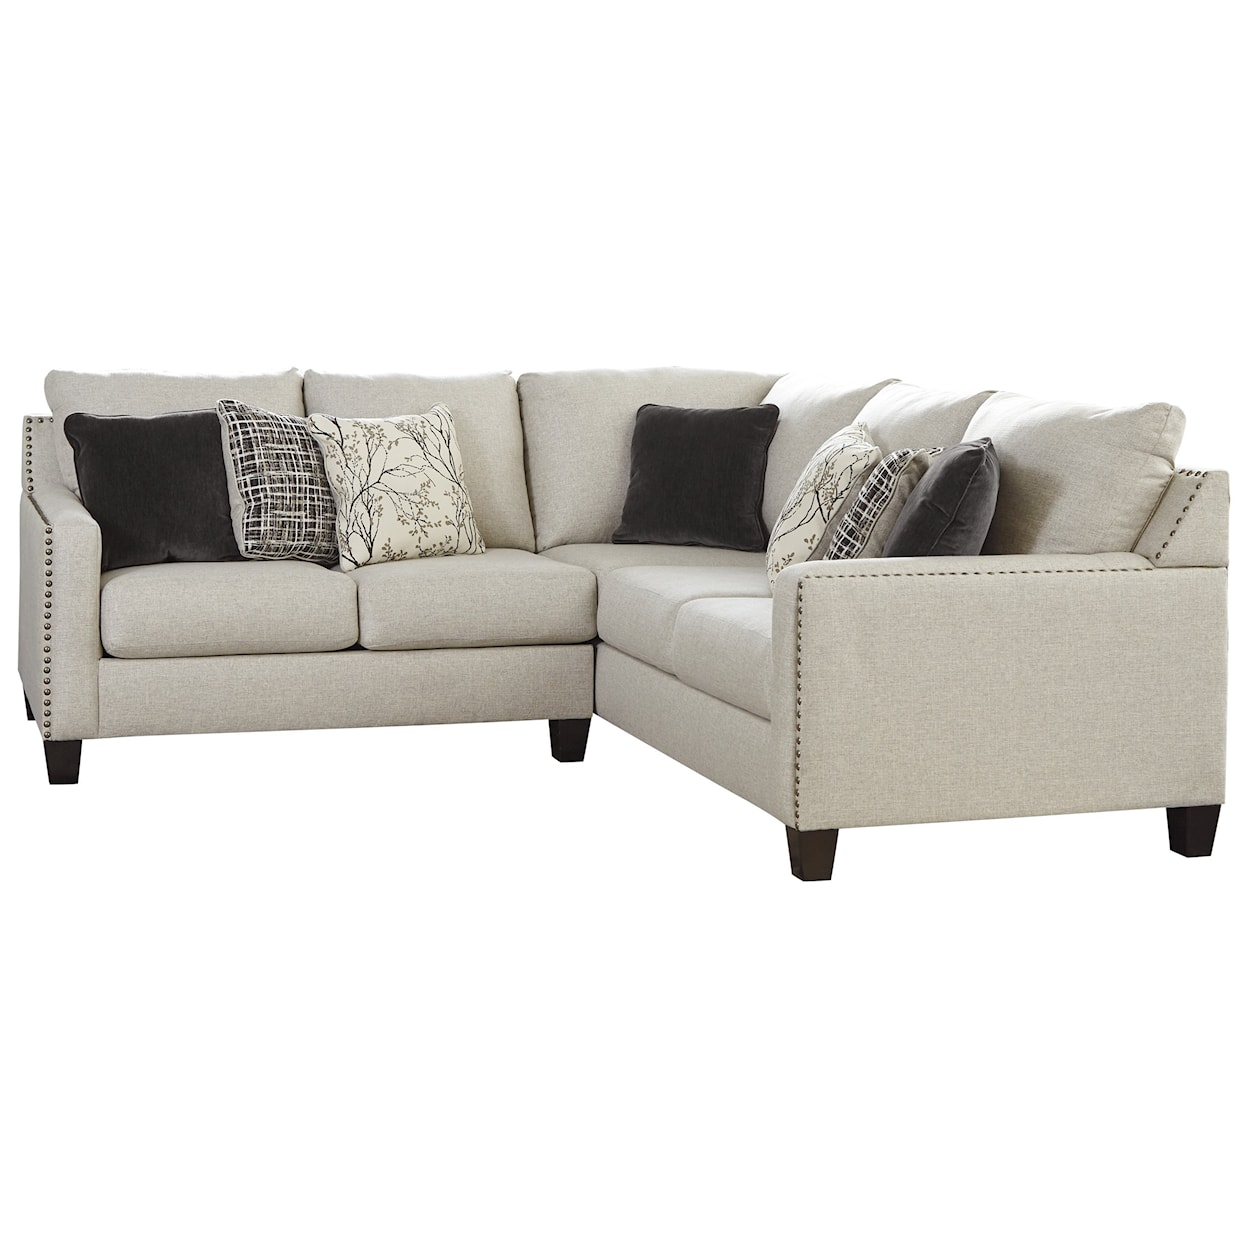 Signature Design by Ashley Hallenberg 2-Piece Sectional